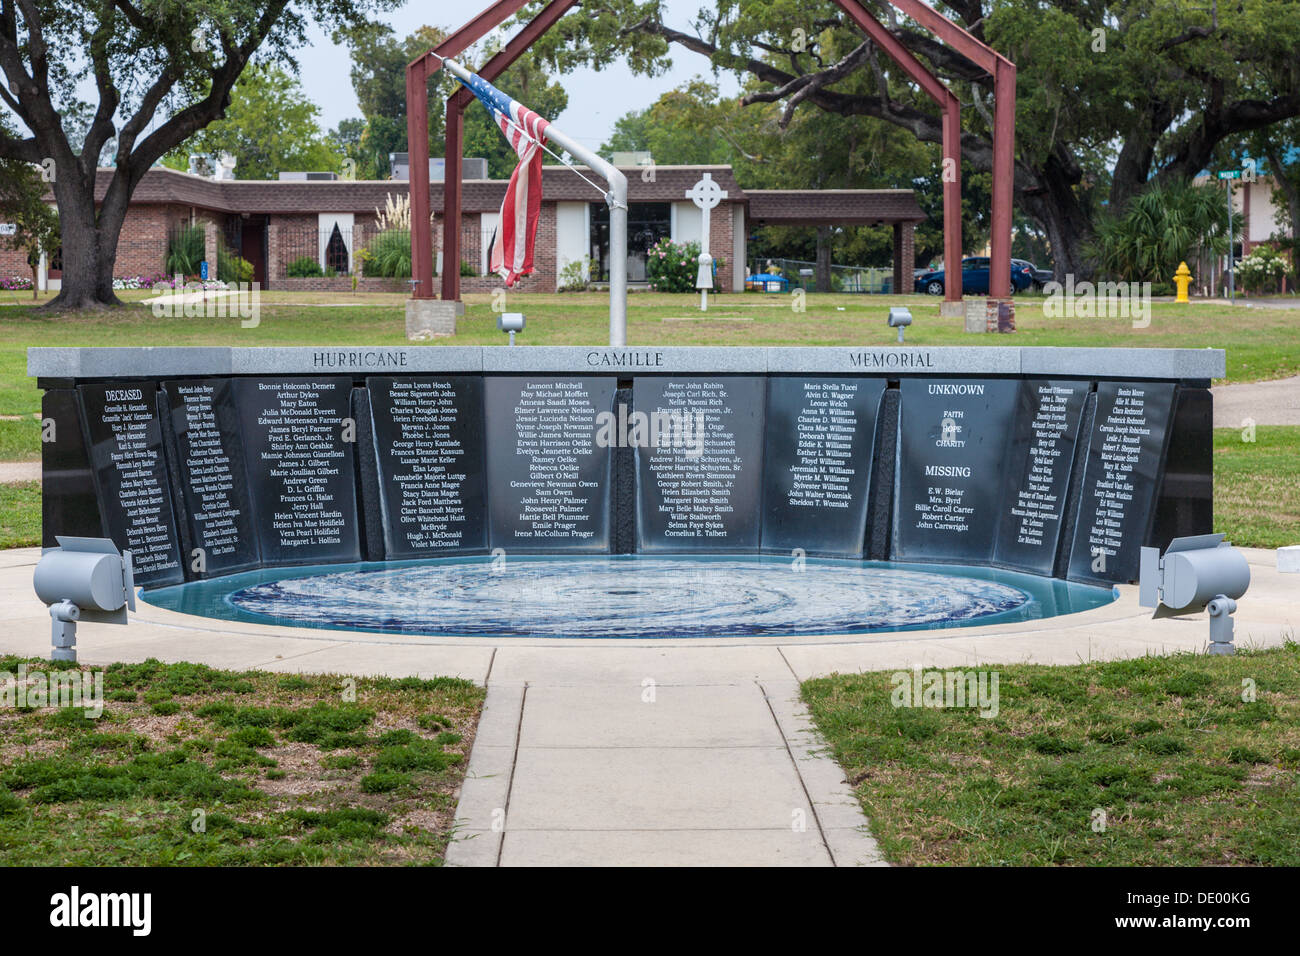 Hurricane Camille Memorial in Biloxi, Mississippi shows names of the dead and missing. Stock Photo